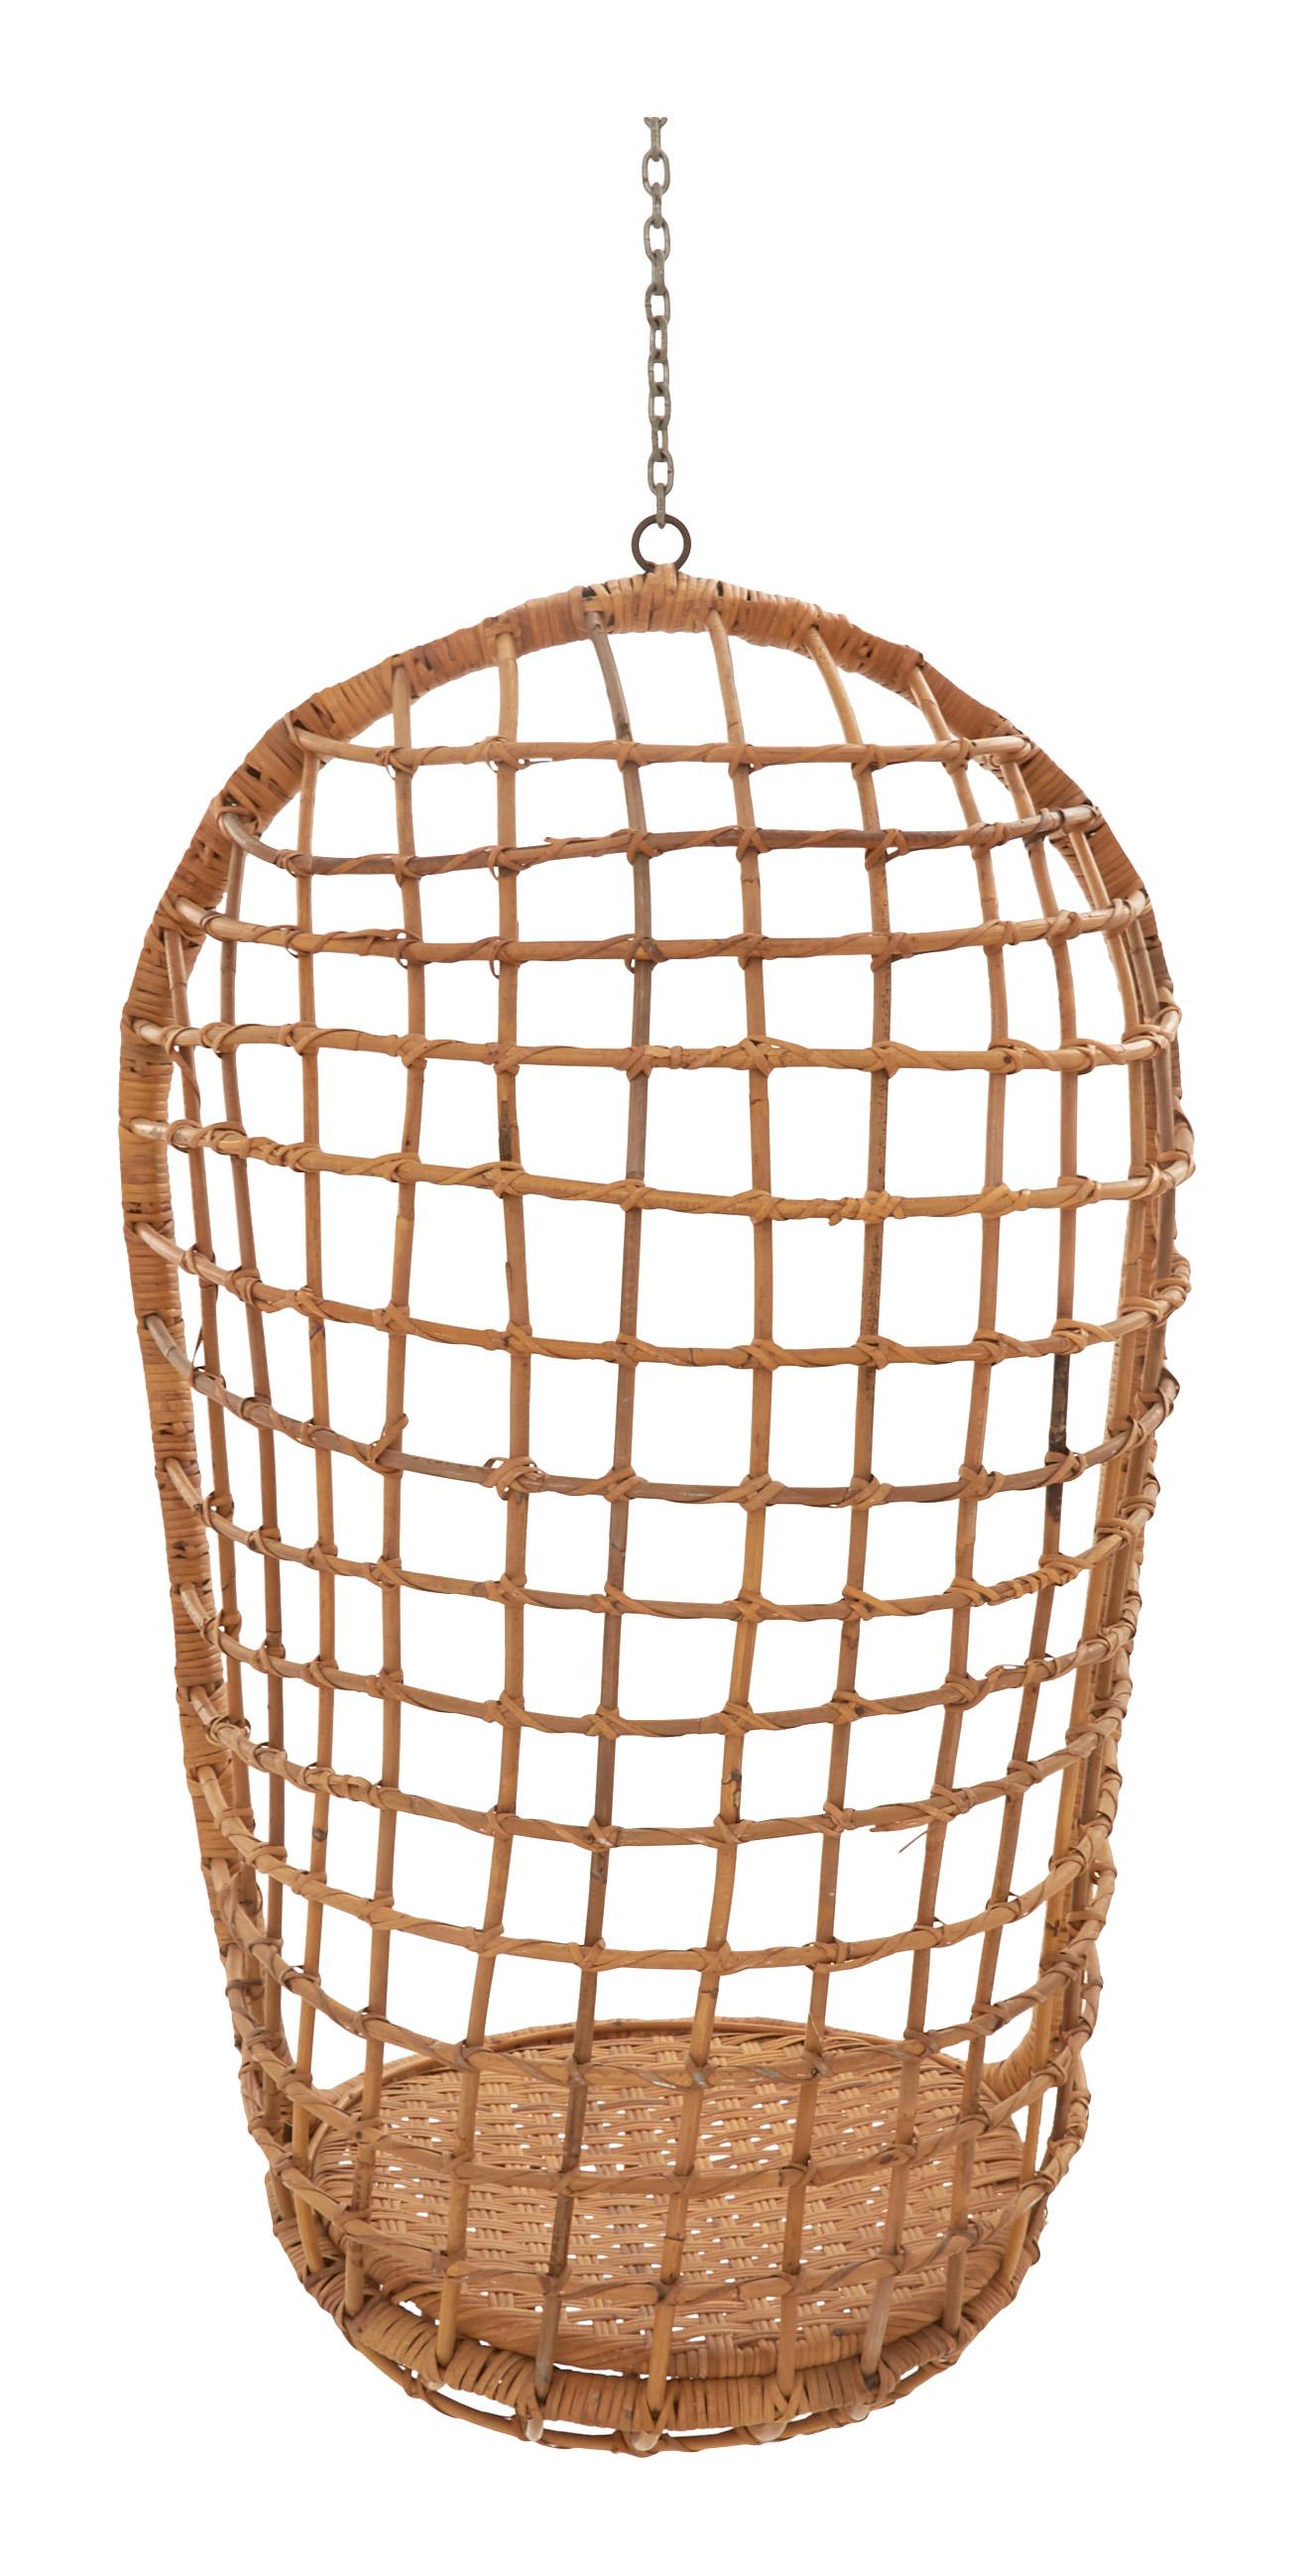 Mid-Century Modern Midcentury Rattan Hanging Chair For Sale